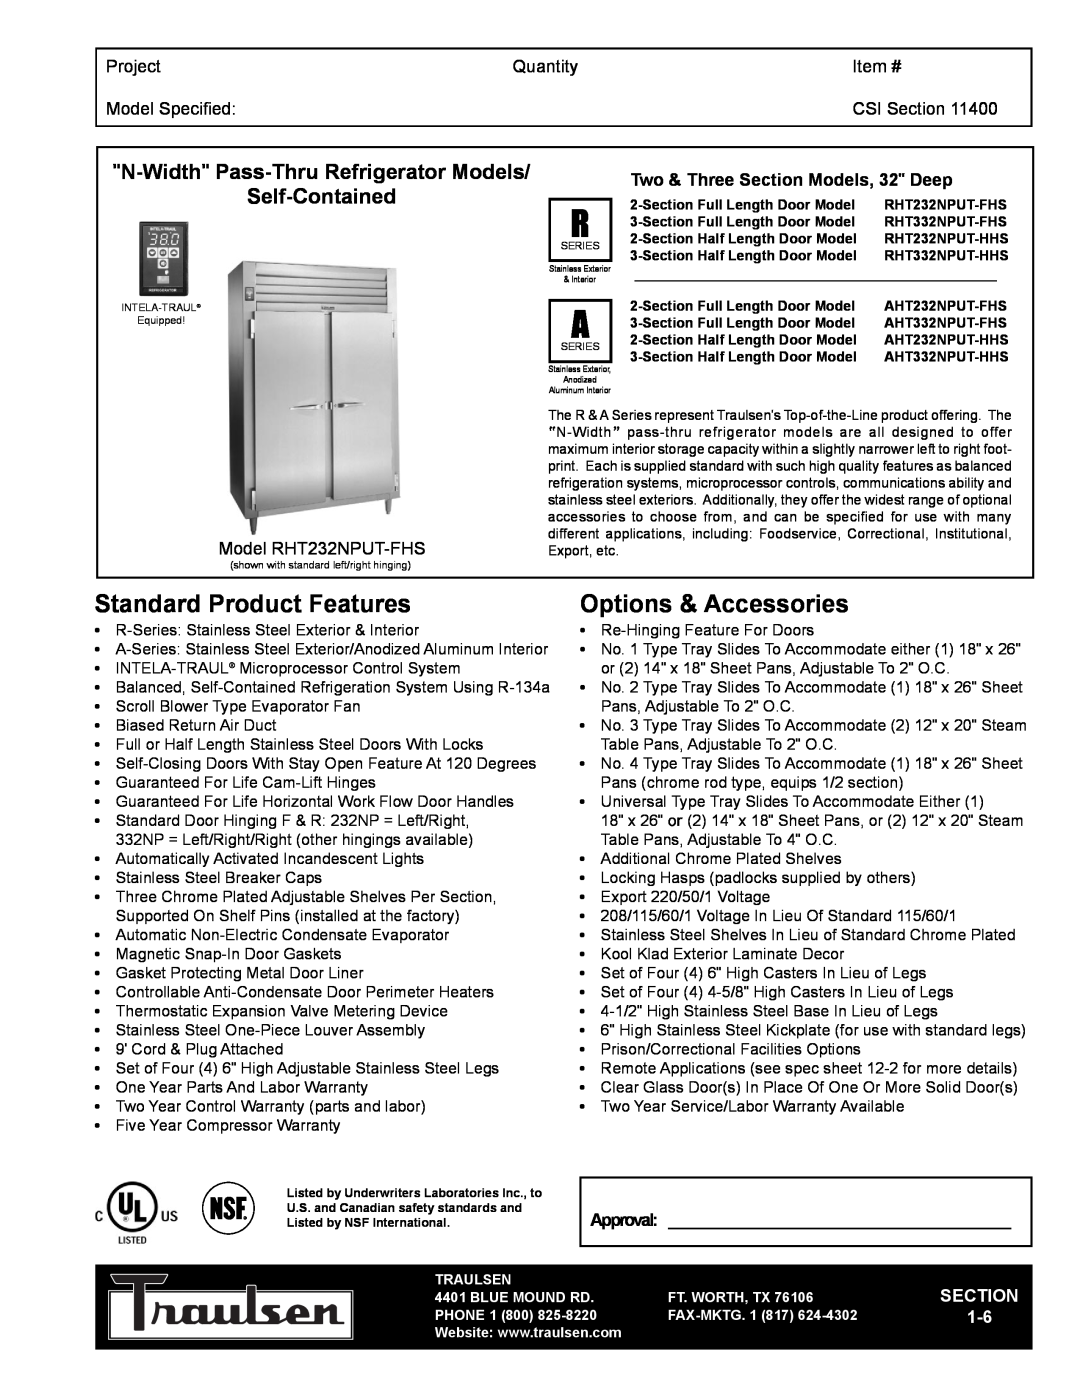 Traulsen RHT332NPUT-FHS warranty N-Width Pass-ThruRefrigerator Models, Project, Quantity, Item #, Model Specified, Section 